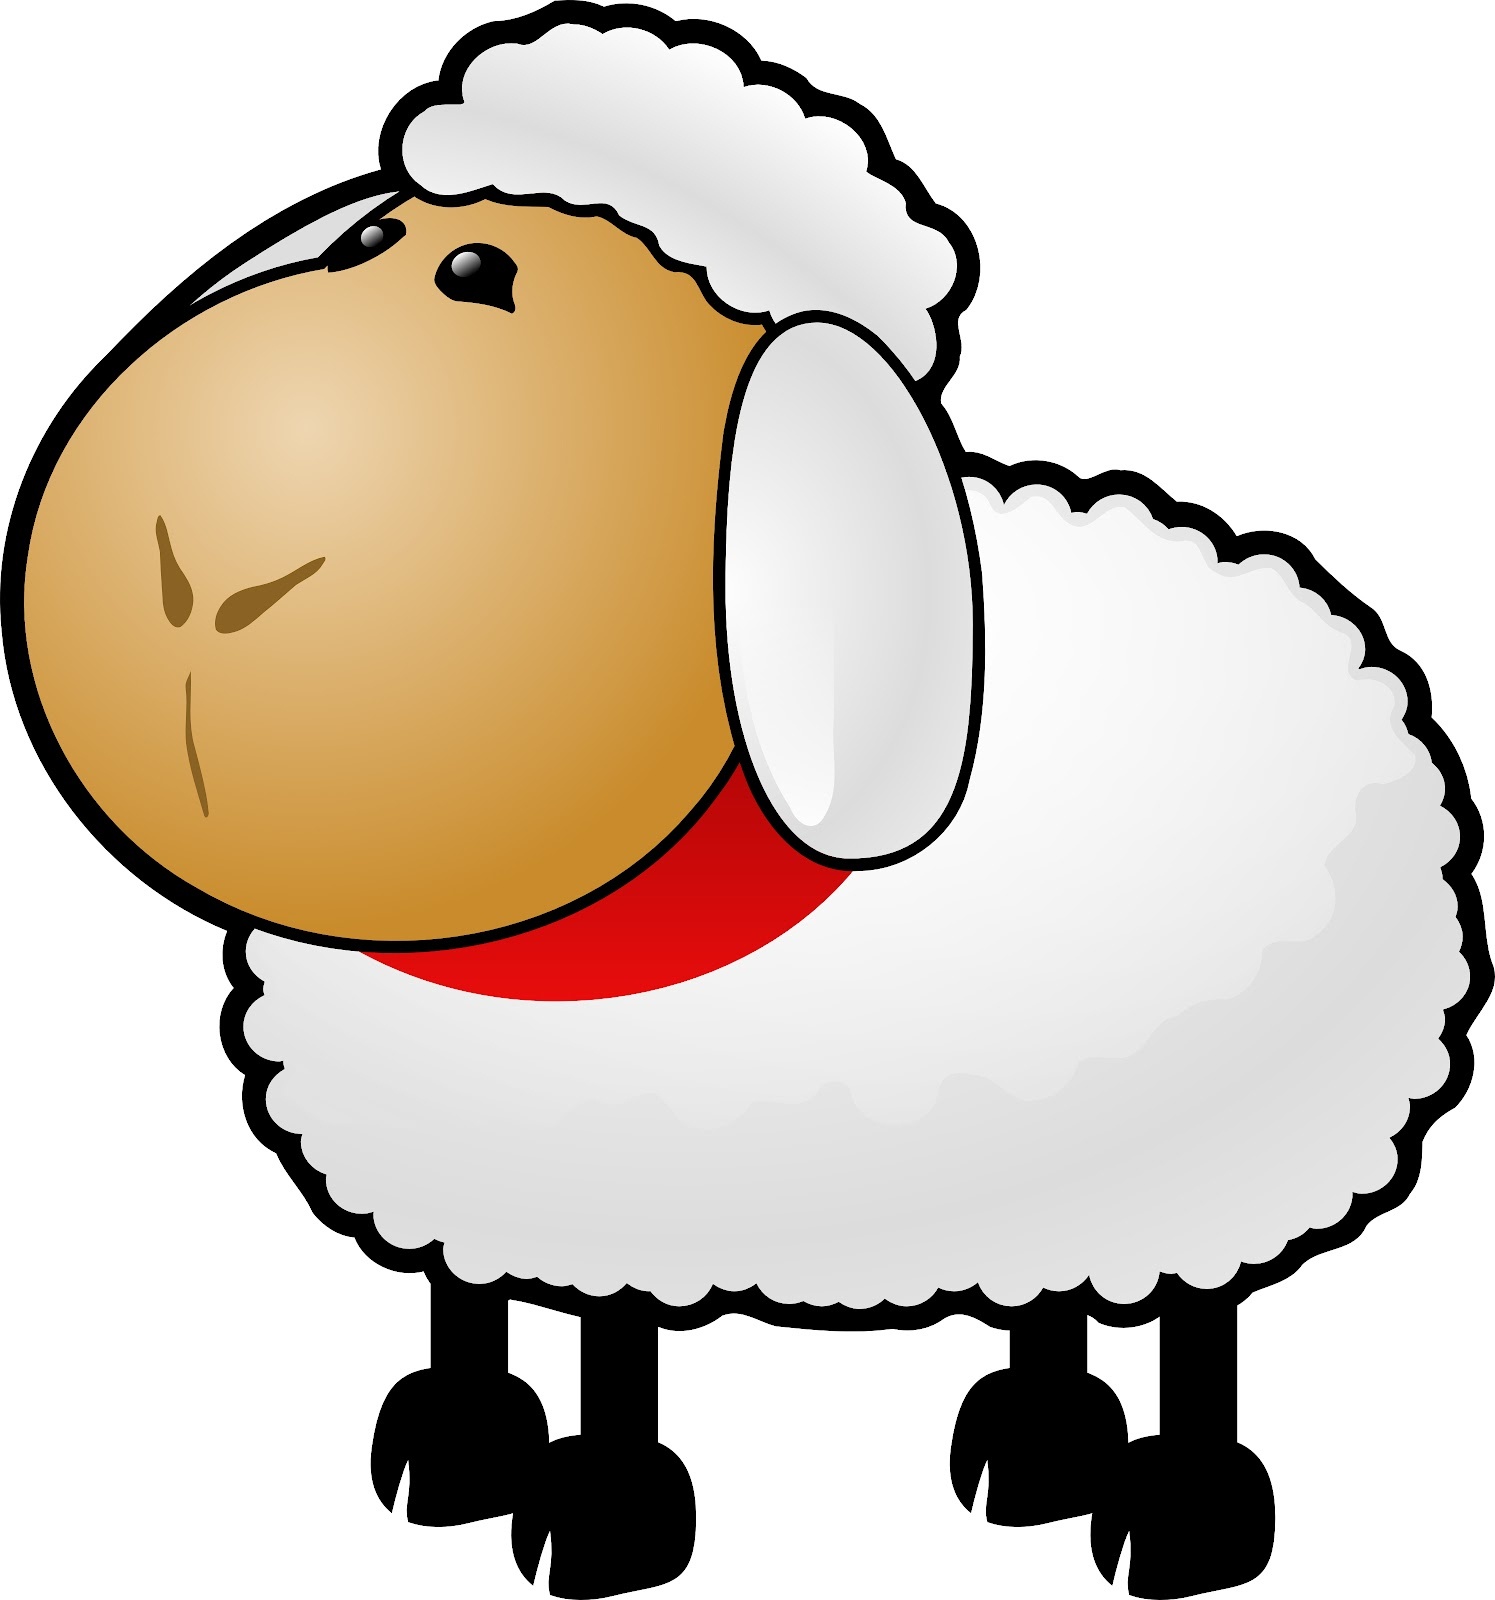 Free Farm Animal Pictures, Download Free Clip Art, Free Clip Art On - Free Printable Farm Animal Clipart